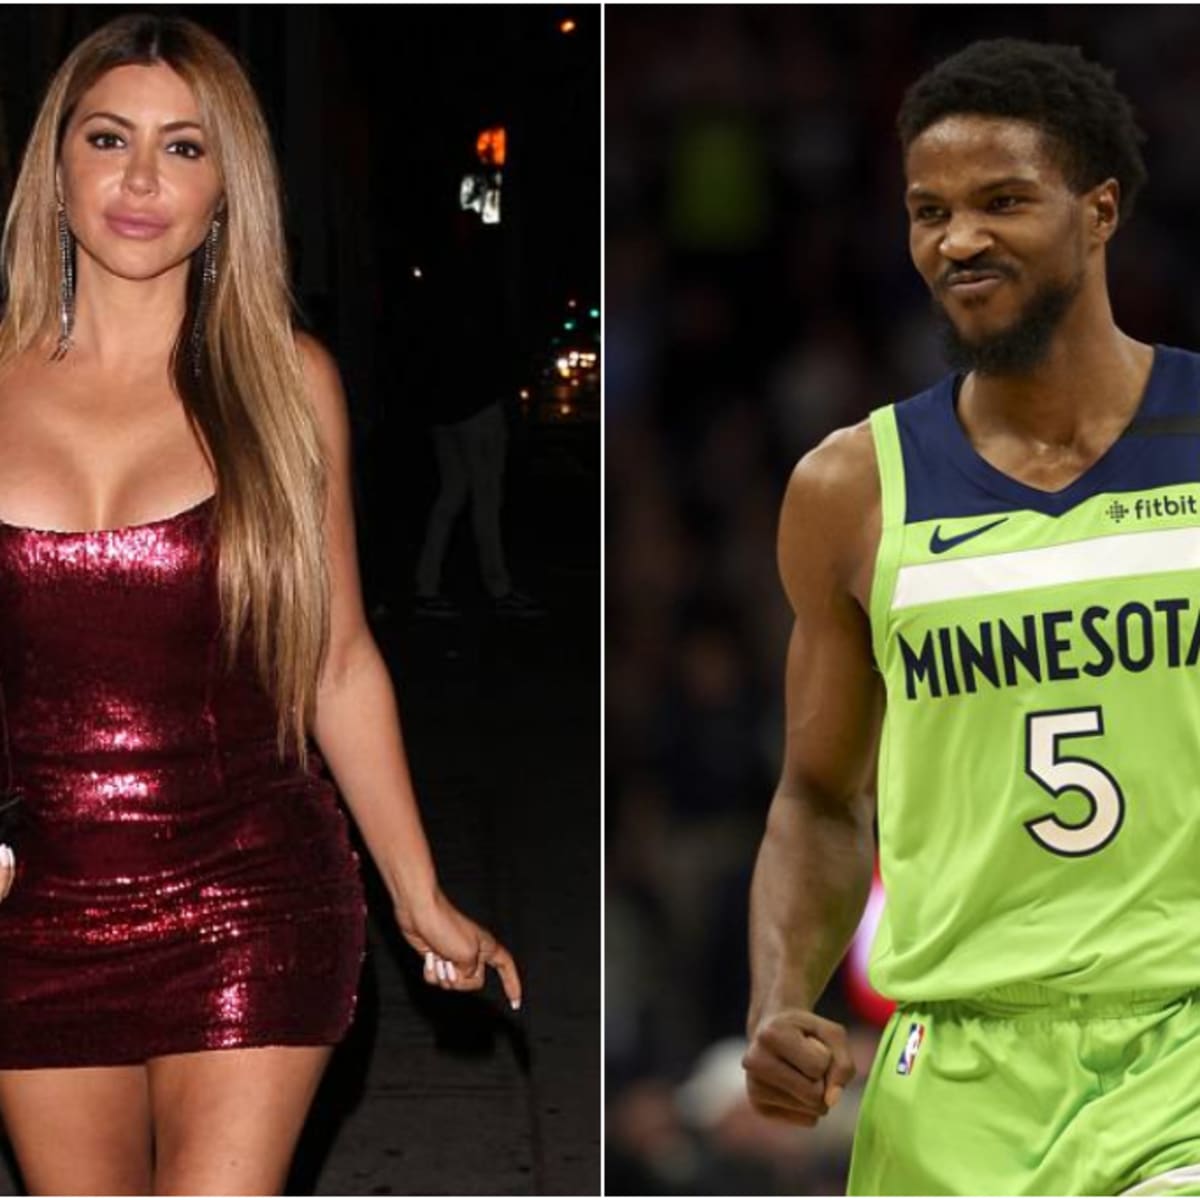 Larsa Pippen And Malik Beasley Are Together Scottie Pippen Jr And Beasley S Wife React To Their Affair Fadeaway World